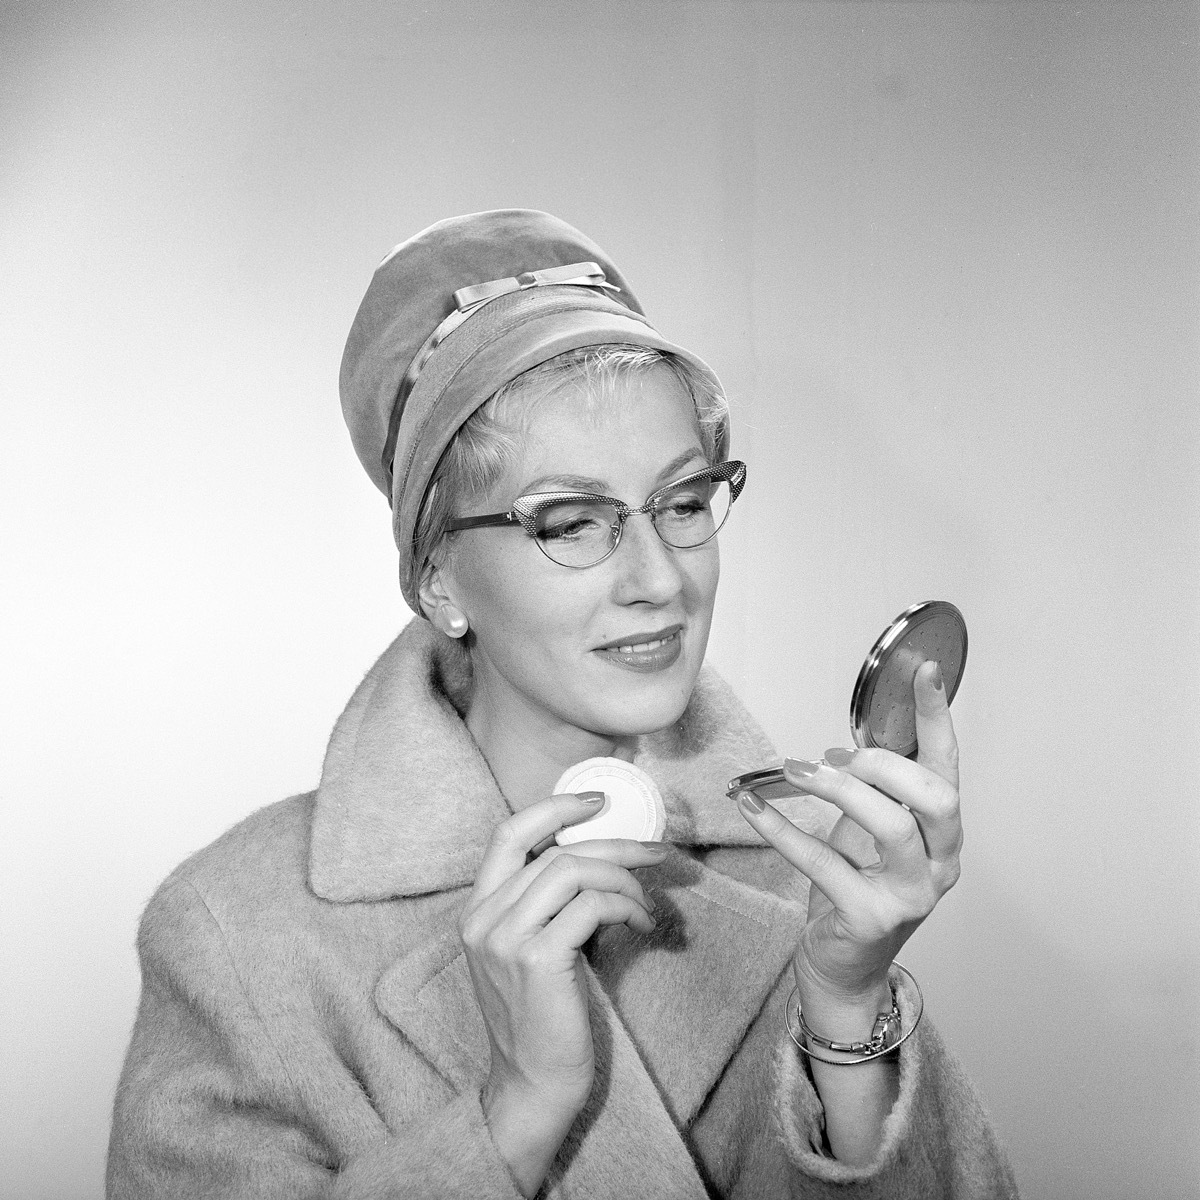 1950s makeup. A young woman is looking at herself in her pocket mirror and improves on her makeup. She is wearing a fashionable hat, typical 50s glasses and a coat. 1950s